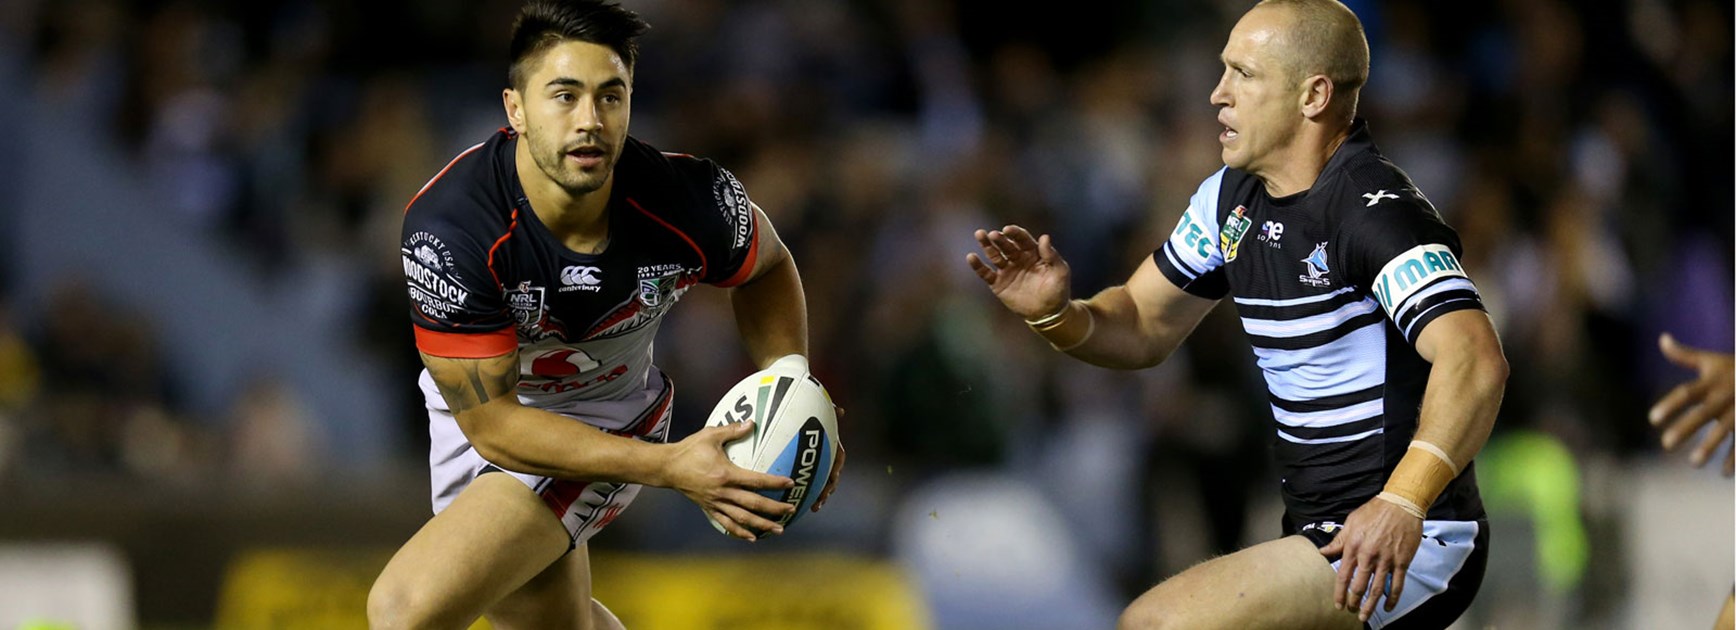 Shaun Johnson scored an astonishing try to win the game for the Warriors in the closing stages of their Round 9 meeting with the Sharks.